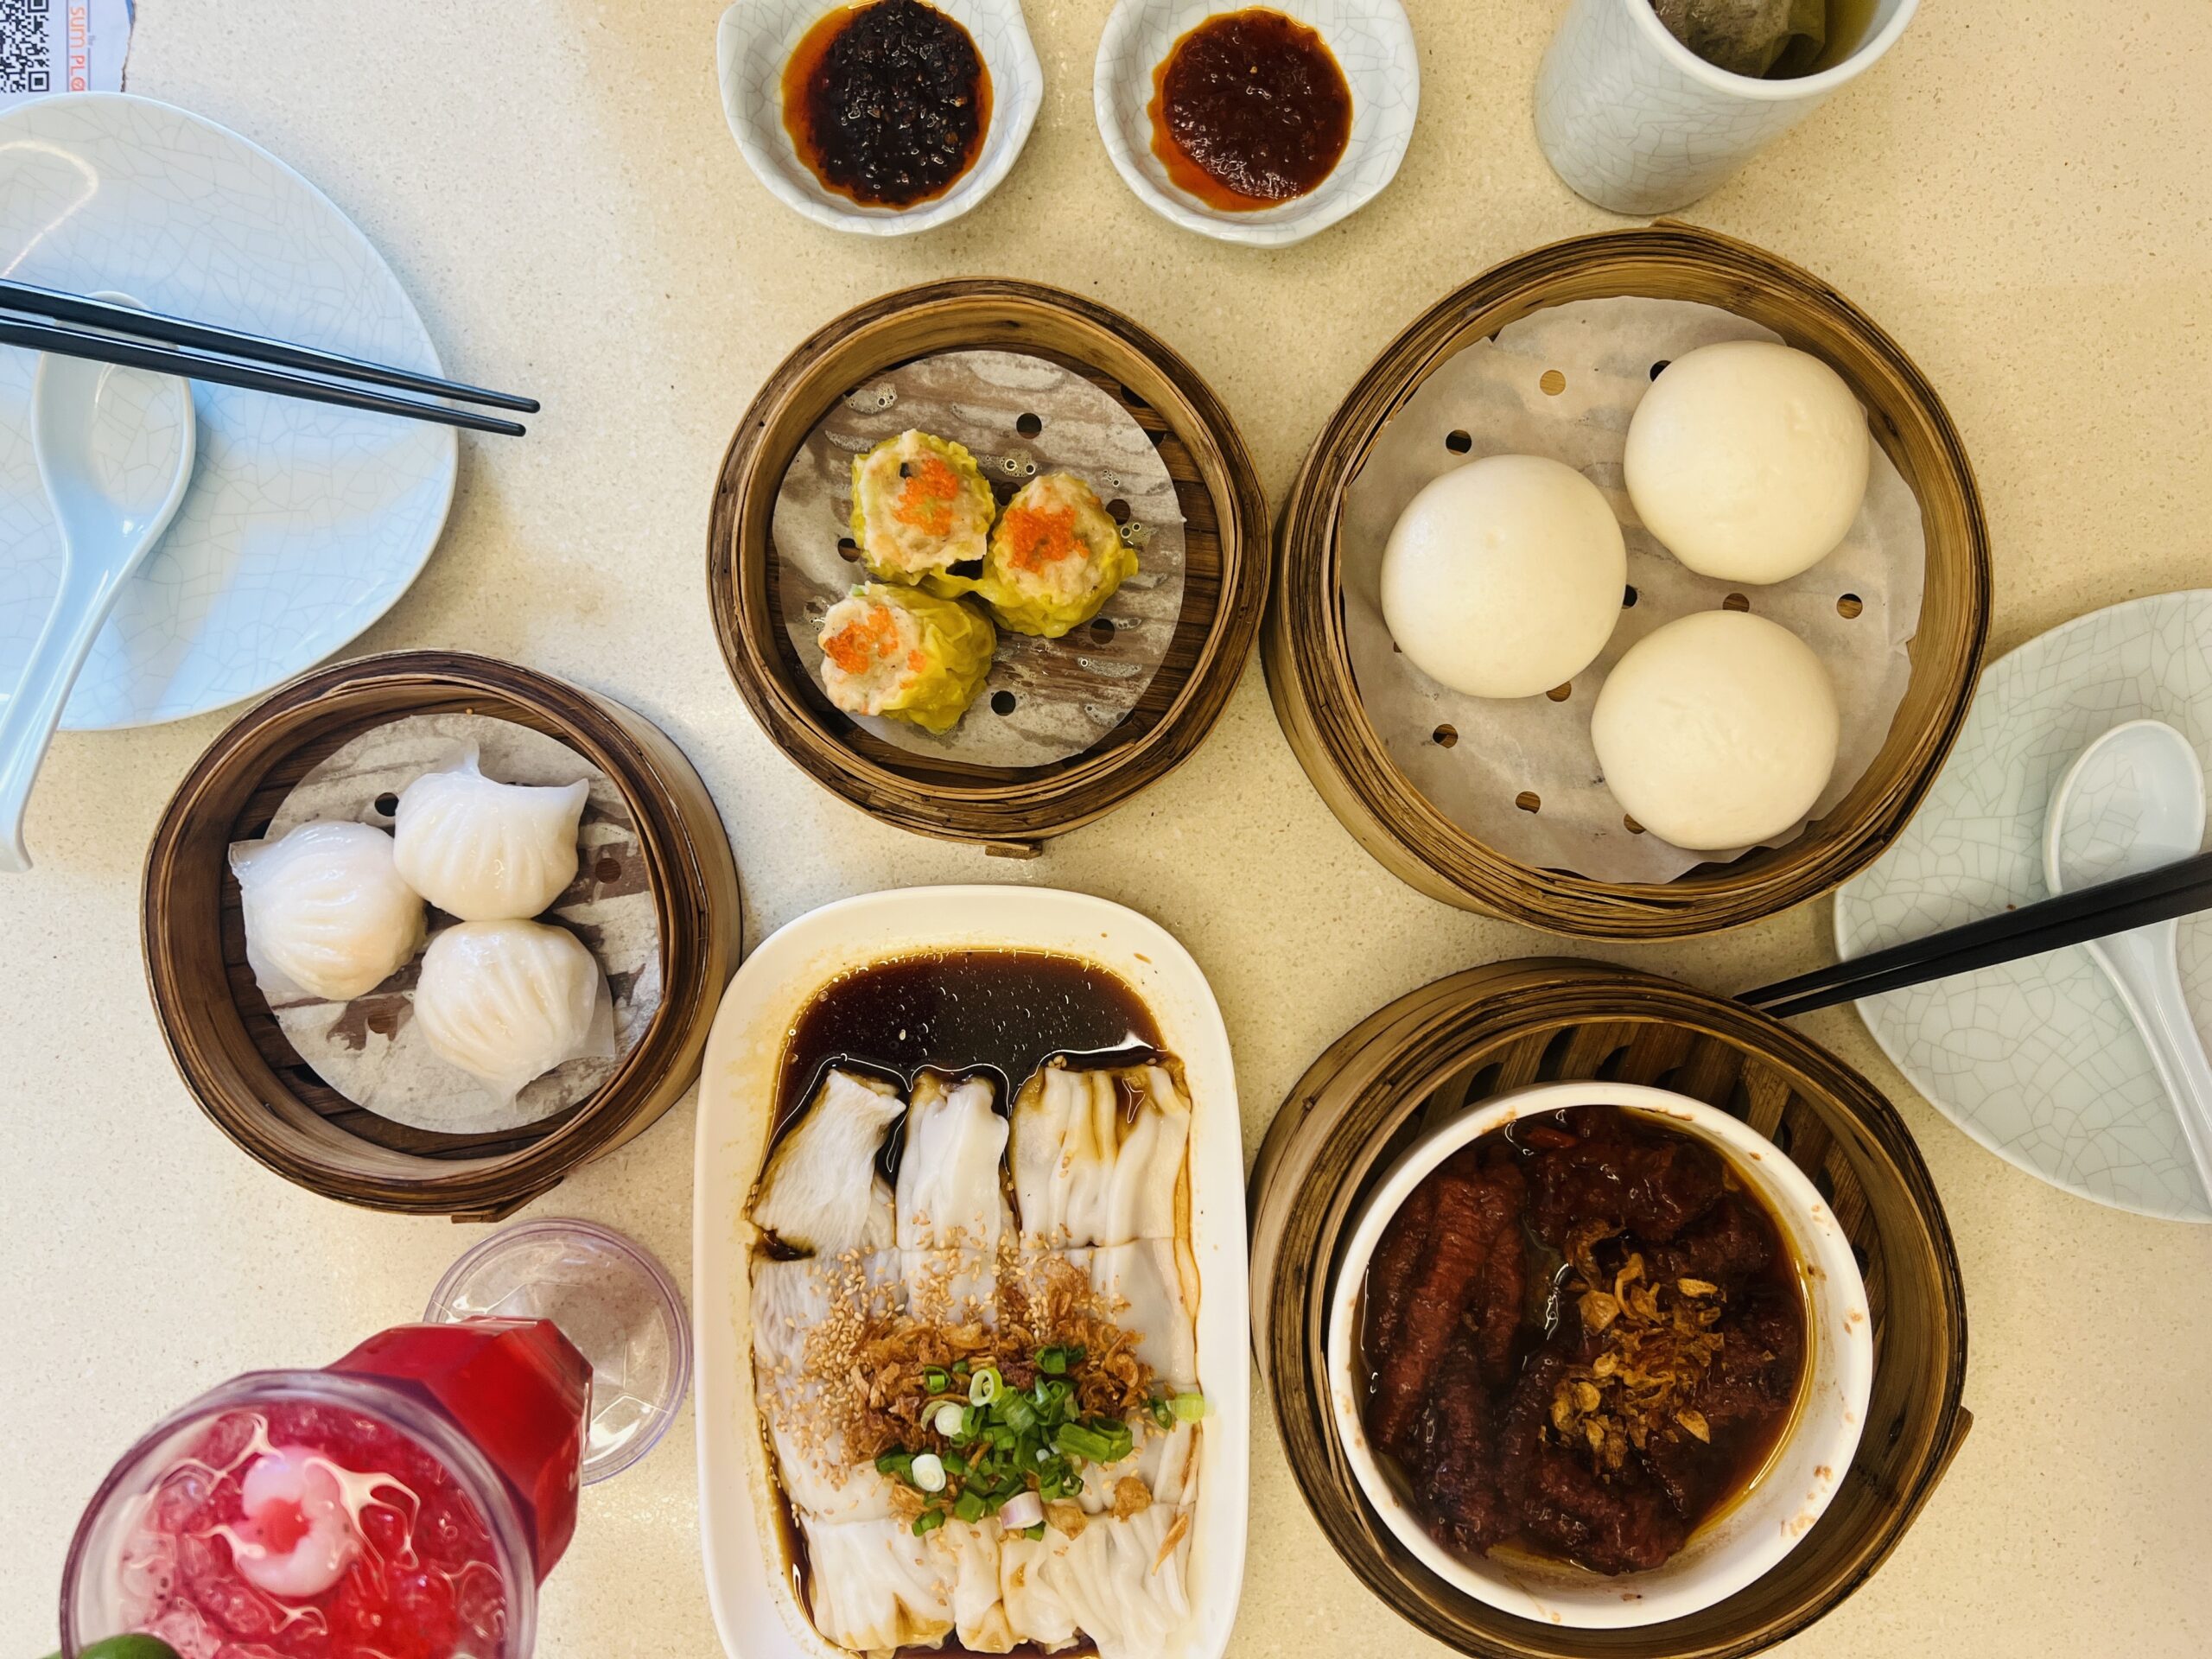 The Dim Sum Place - Featured Image